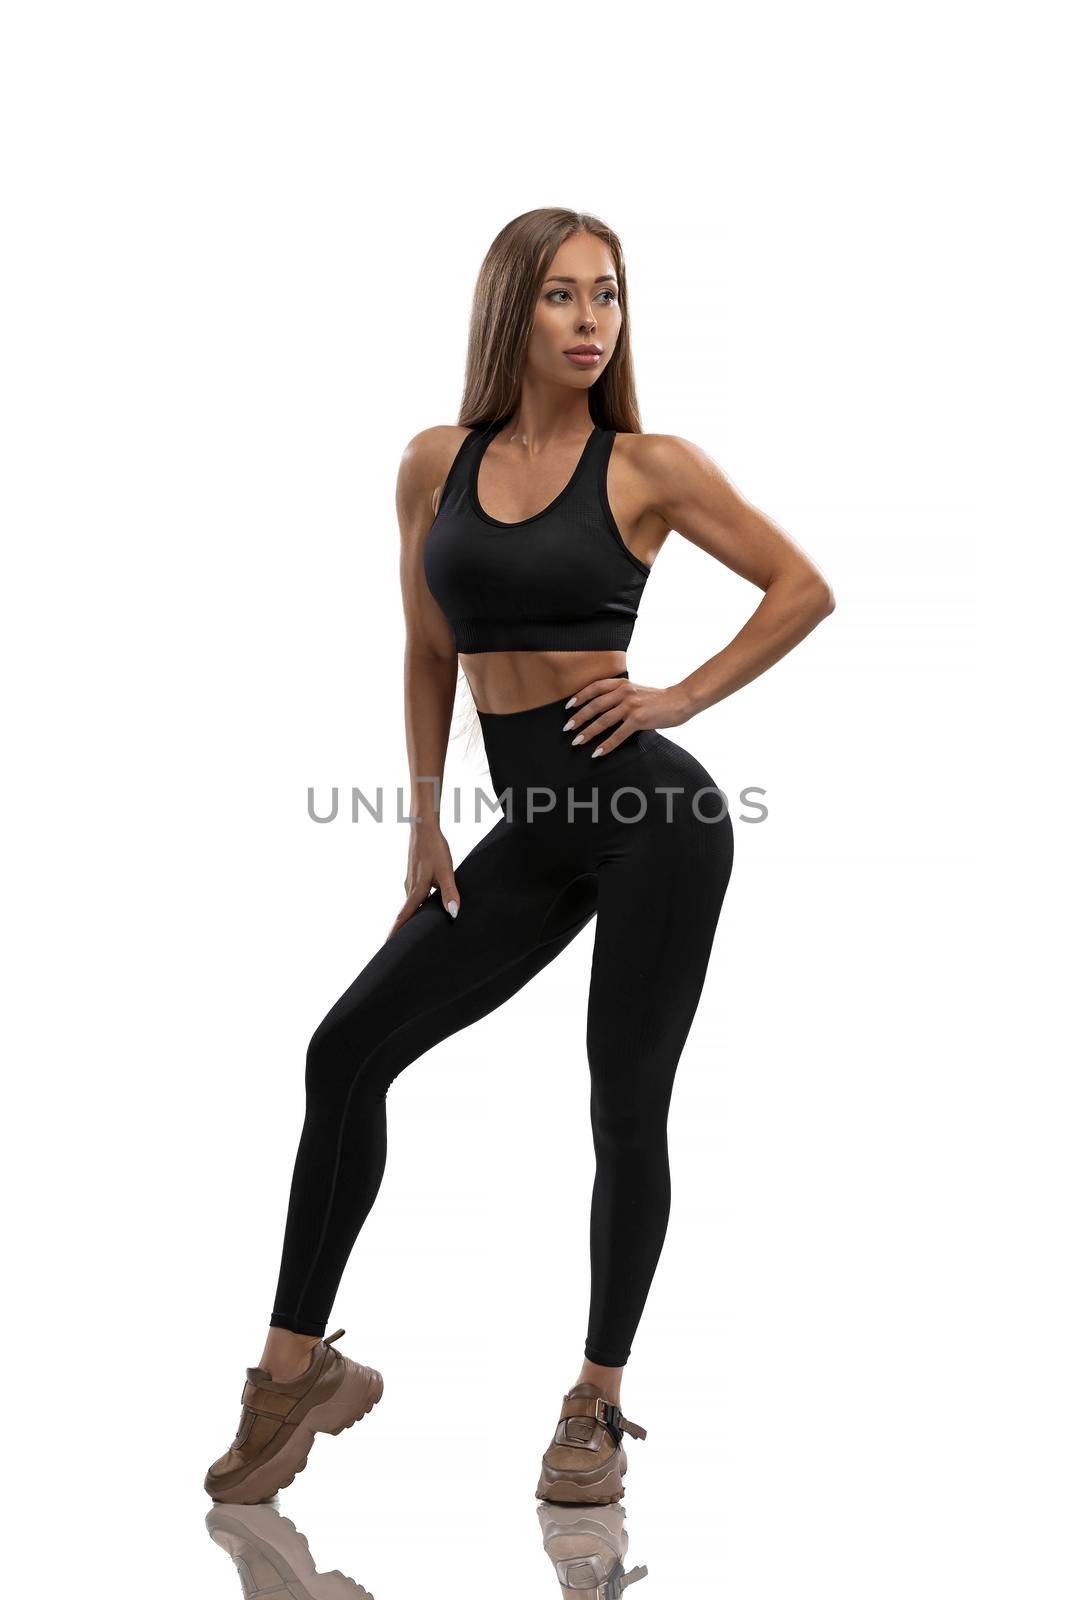 Sexy fit girl in black leggings and top on a white background in the studio by but_photo